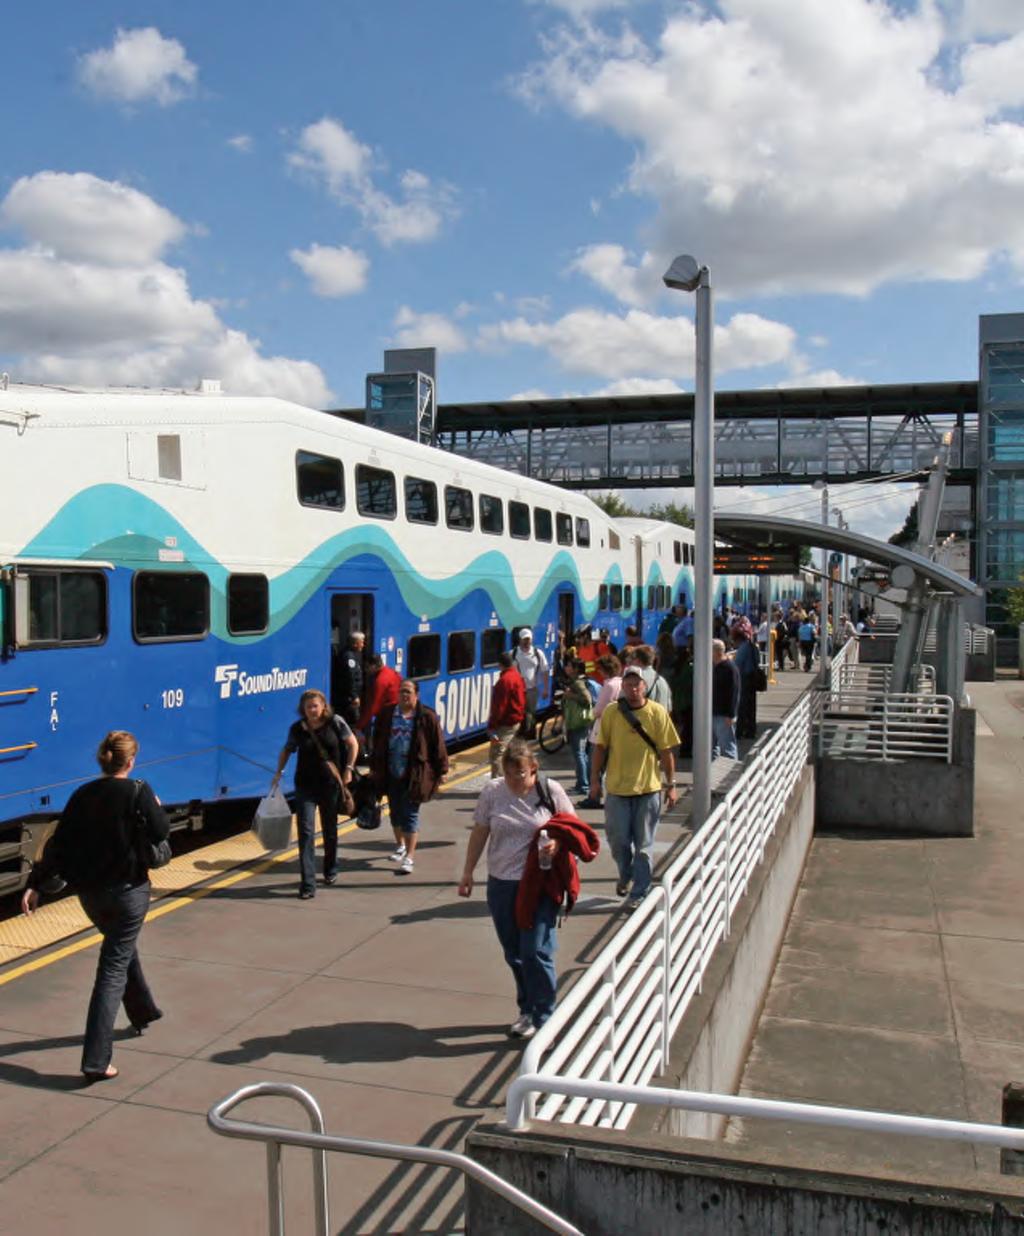 36th Ave S OTHER SOUND TRANSIT PROJECTS IN THE AUBURN AREA Sounder South Capacity Expansion As ridership on the Sounder South line continues to grow, Sound Transit is working to increase train and